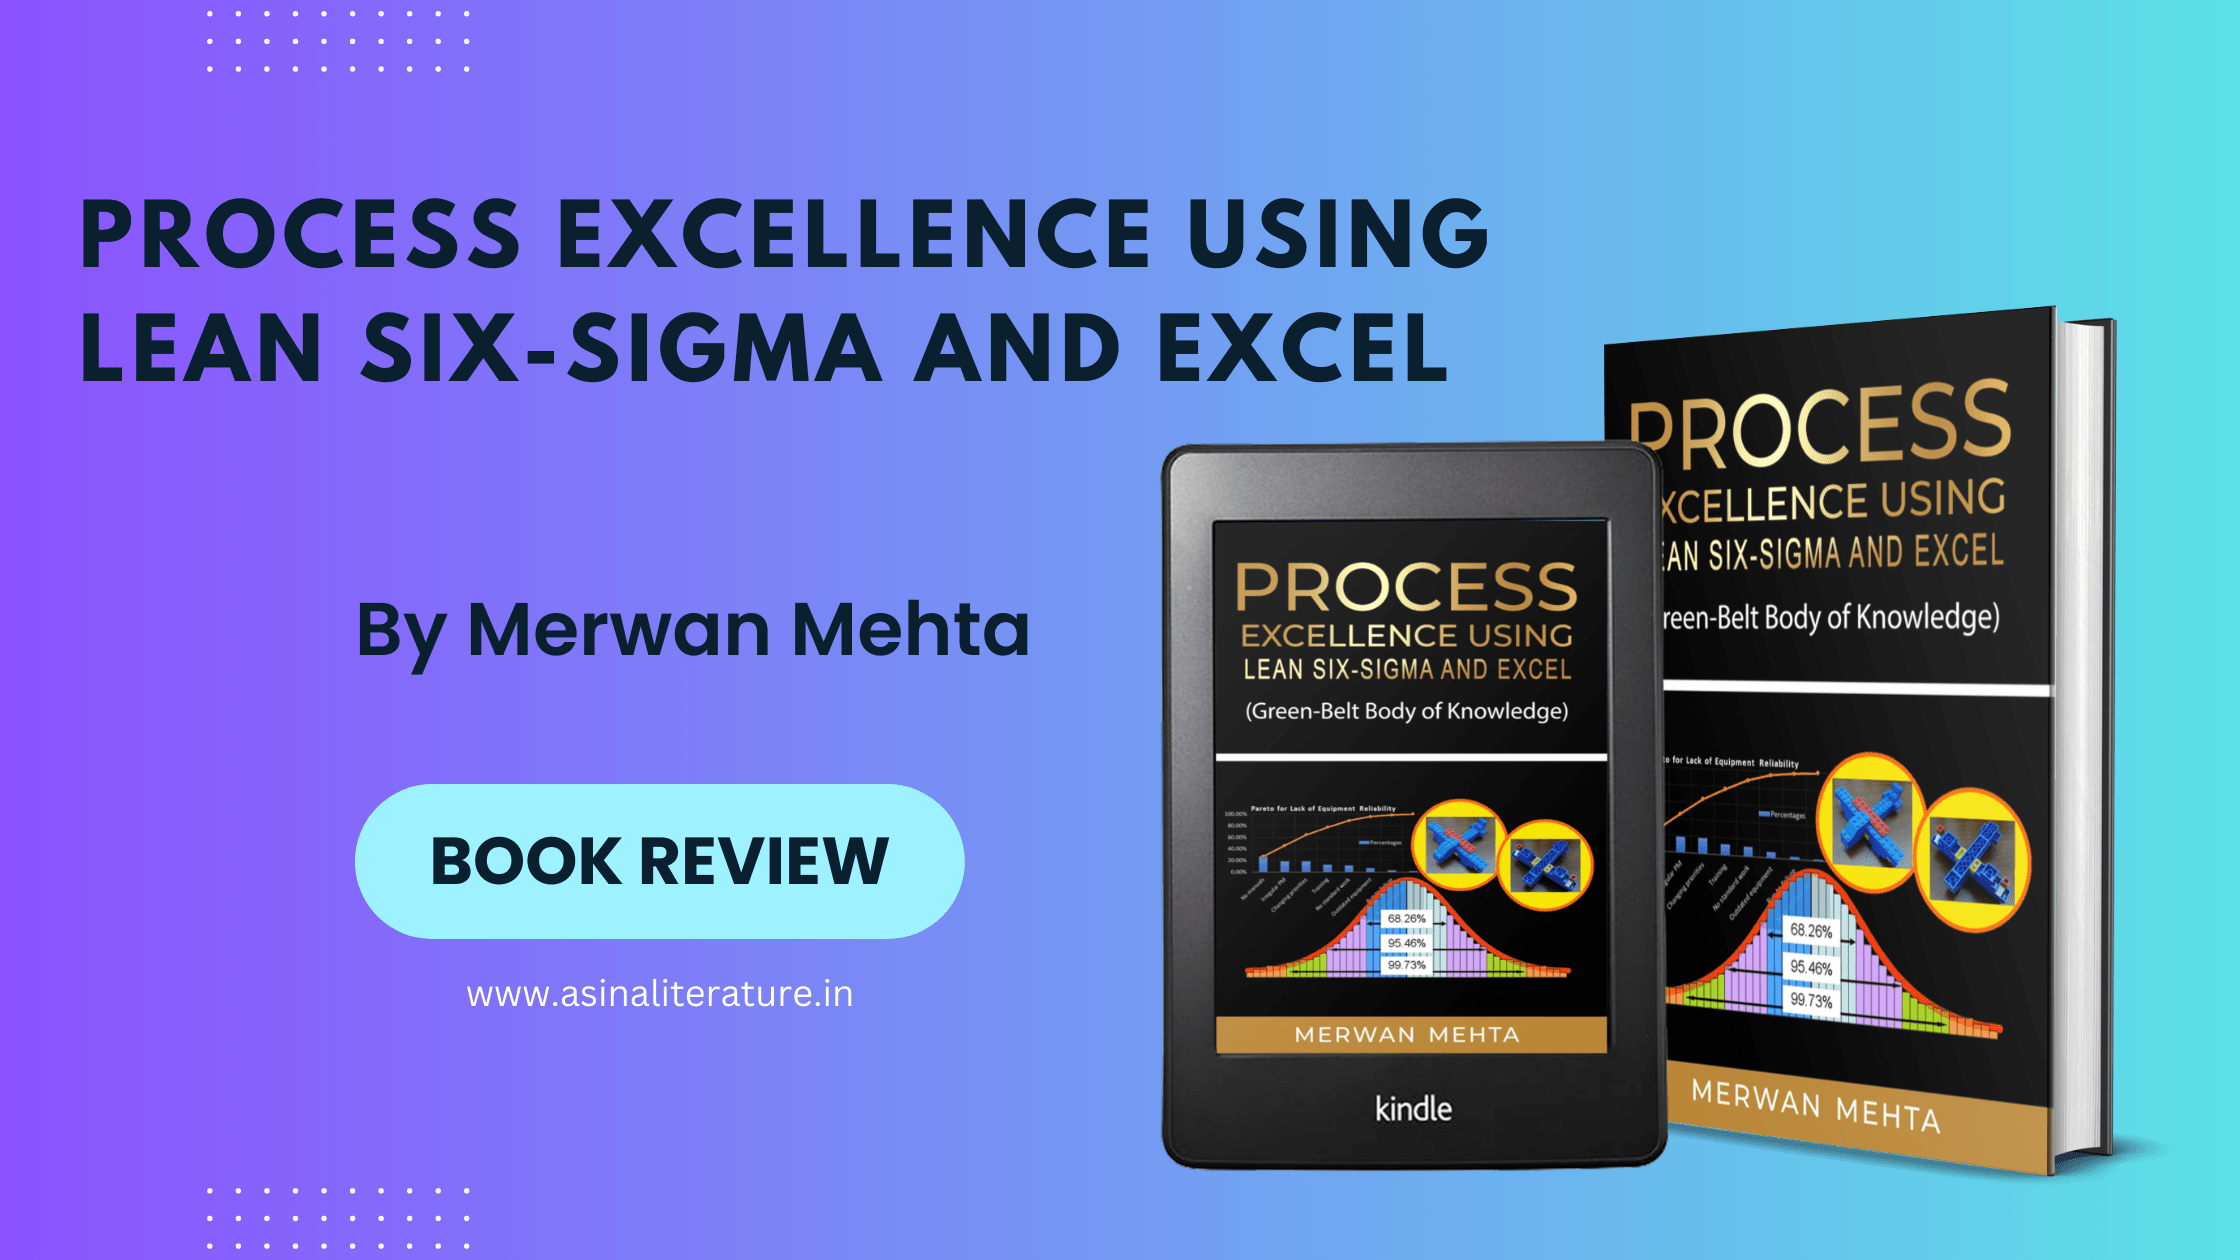 Process Excellence Using Lean Six-Sigma And Excel